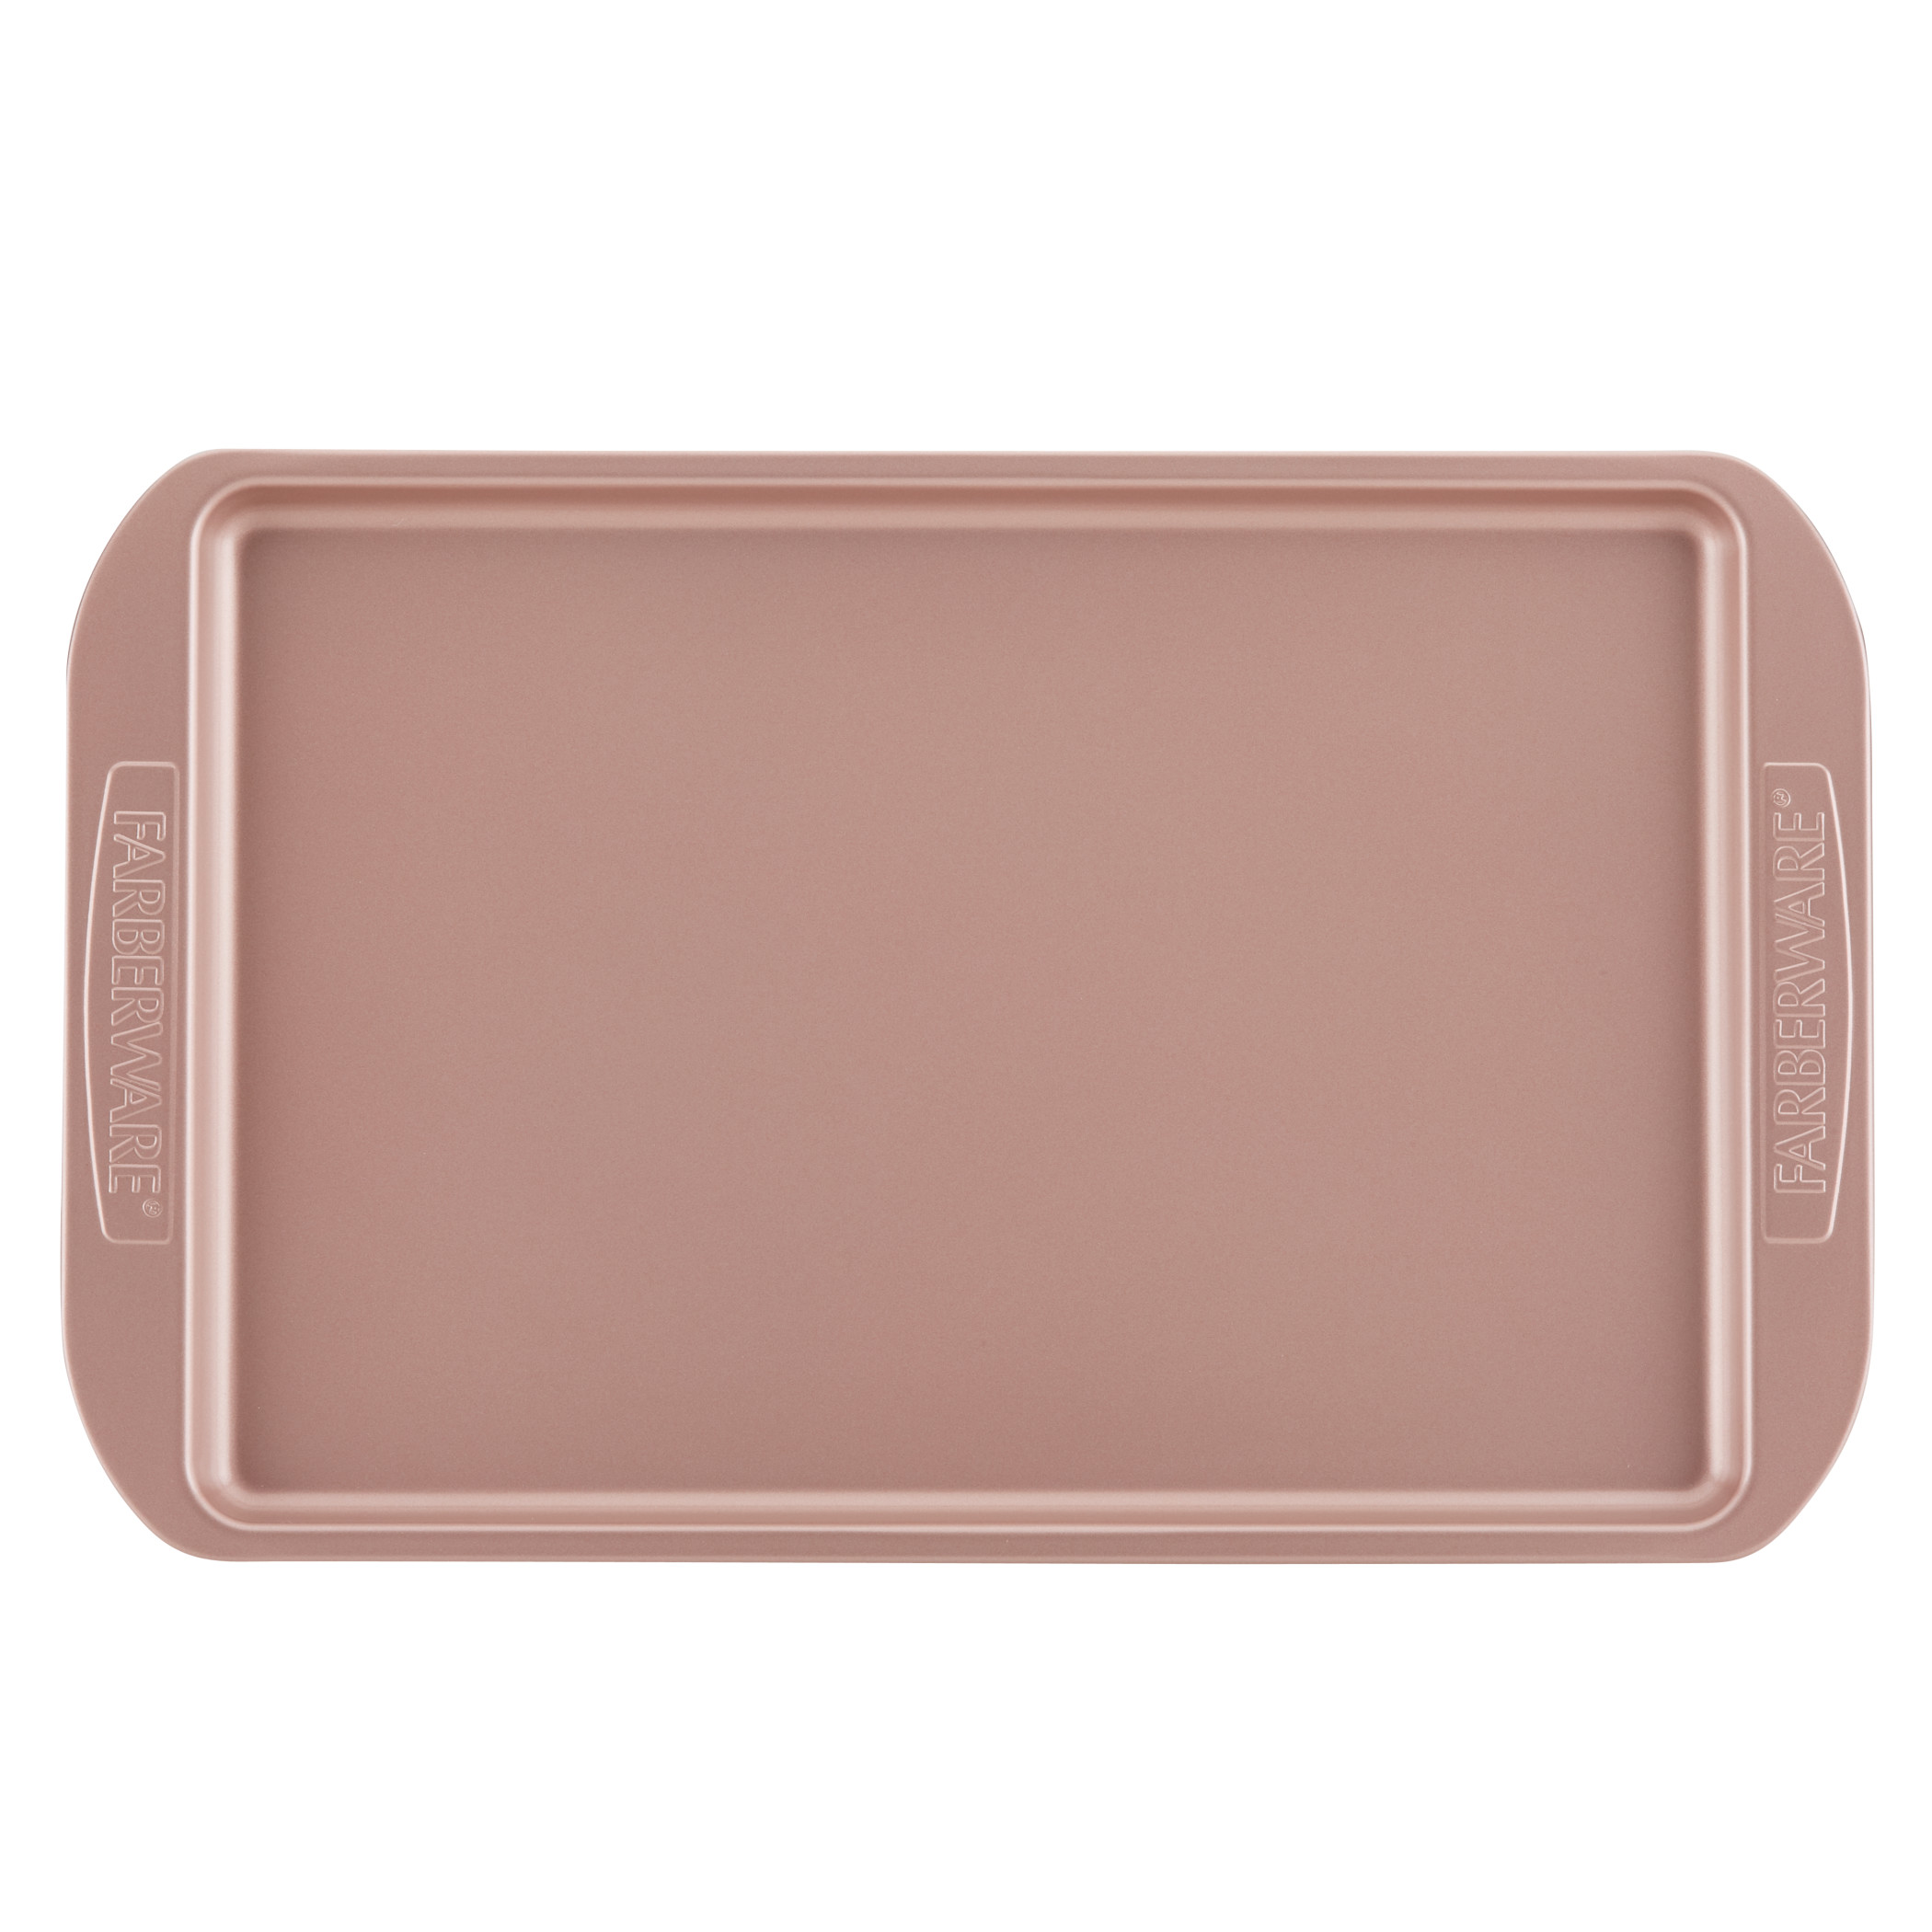 Rose Gold 3 Piece Farberware 120 Limited Edition Bakeware Nonstick Cookie Set//Baking Sheets//Pans